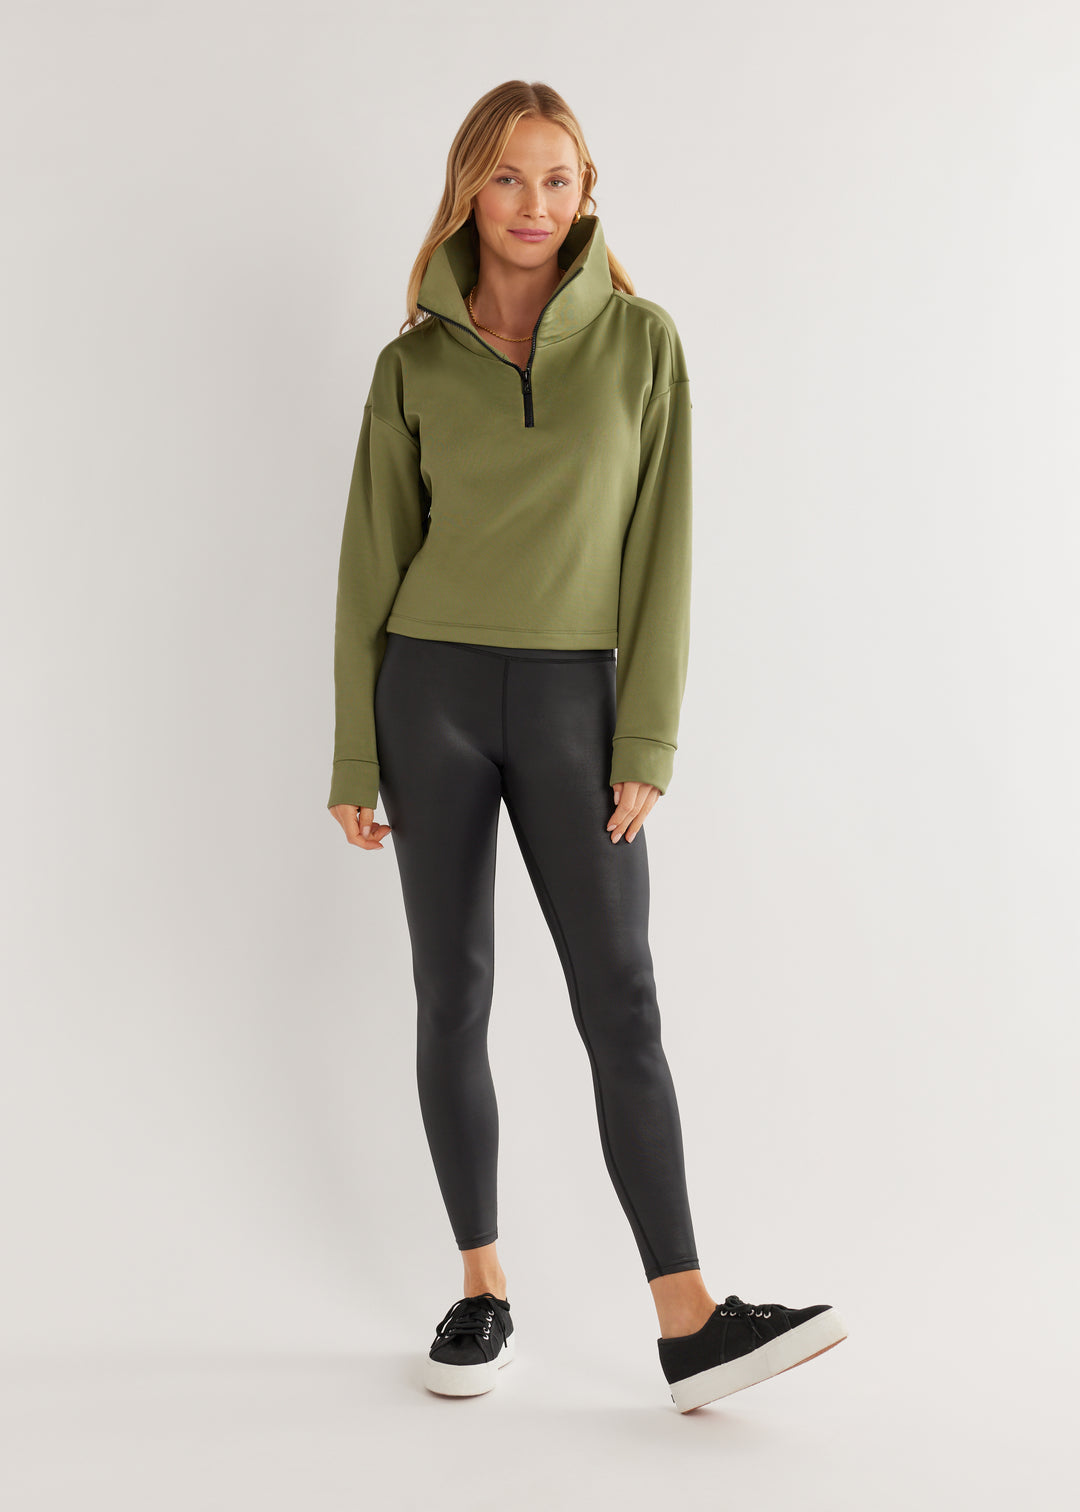 Dunning Pullover in Power Stretch (Army Green)